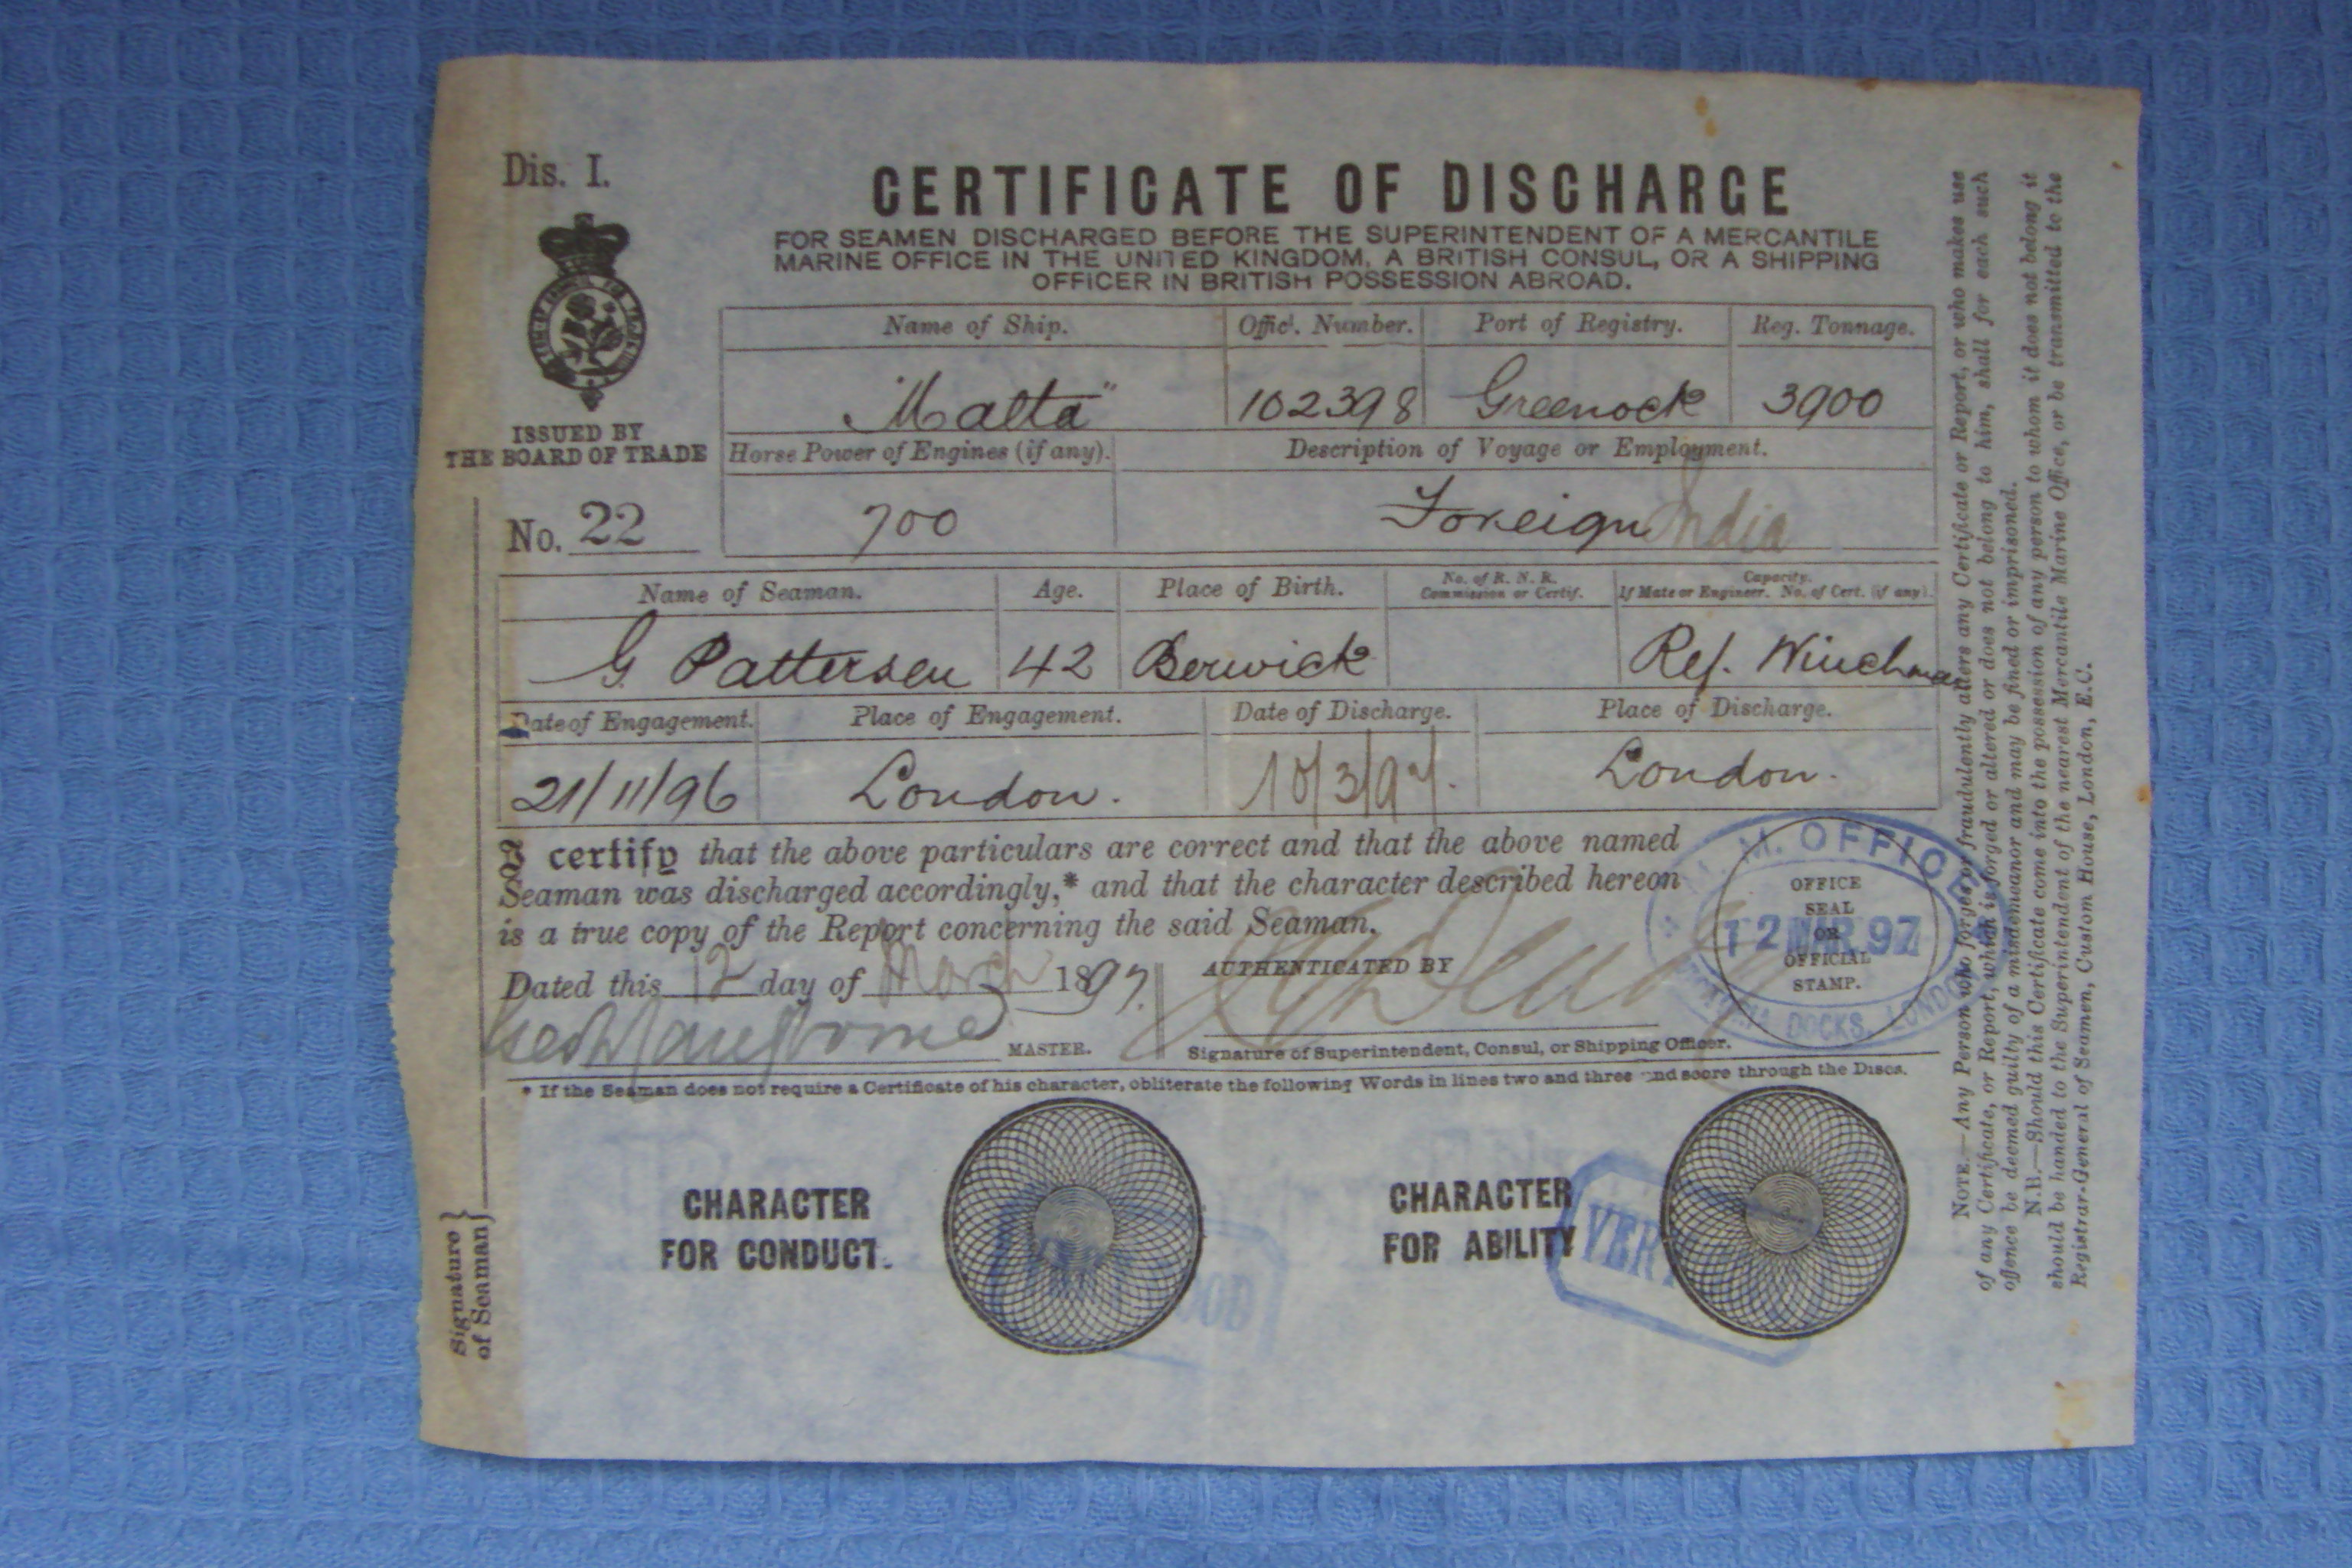 ORIGINAL 'CERTIFICATE OF DISCHARGE' FROM THE OLD P&O VESSEL 'MALTA' DATED MARCH 1897